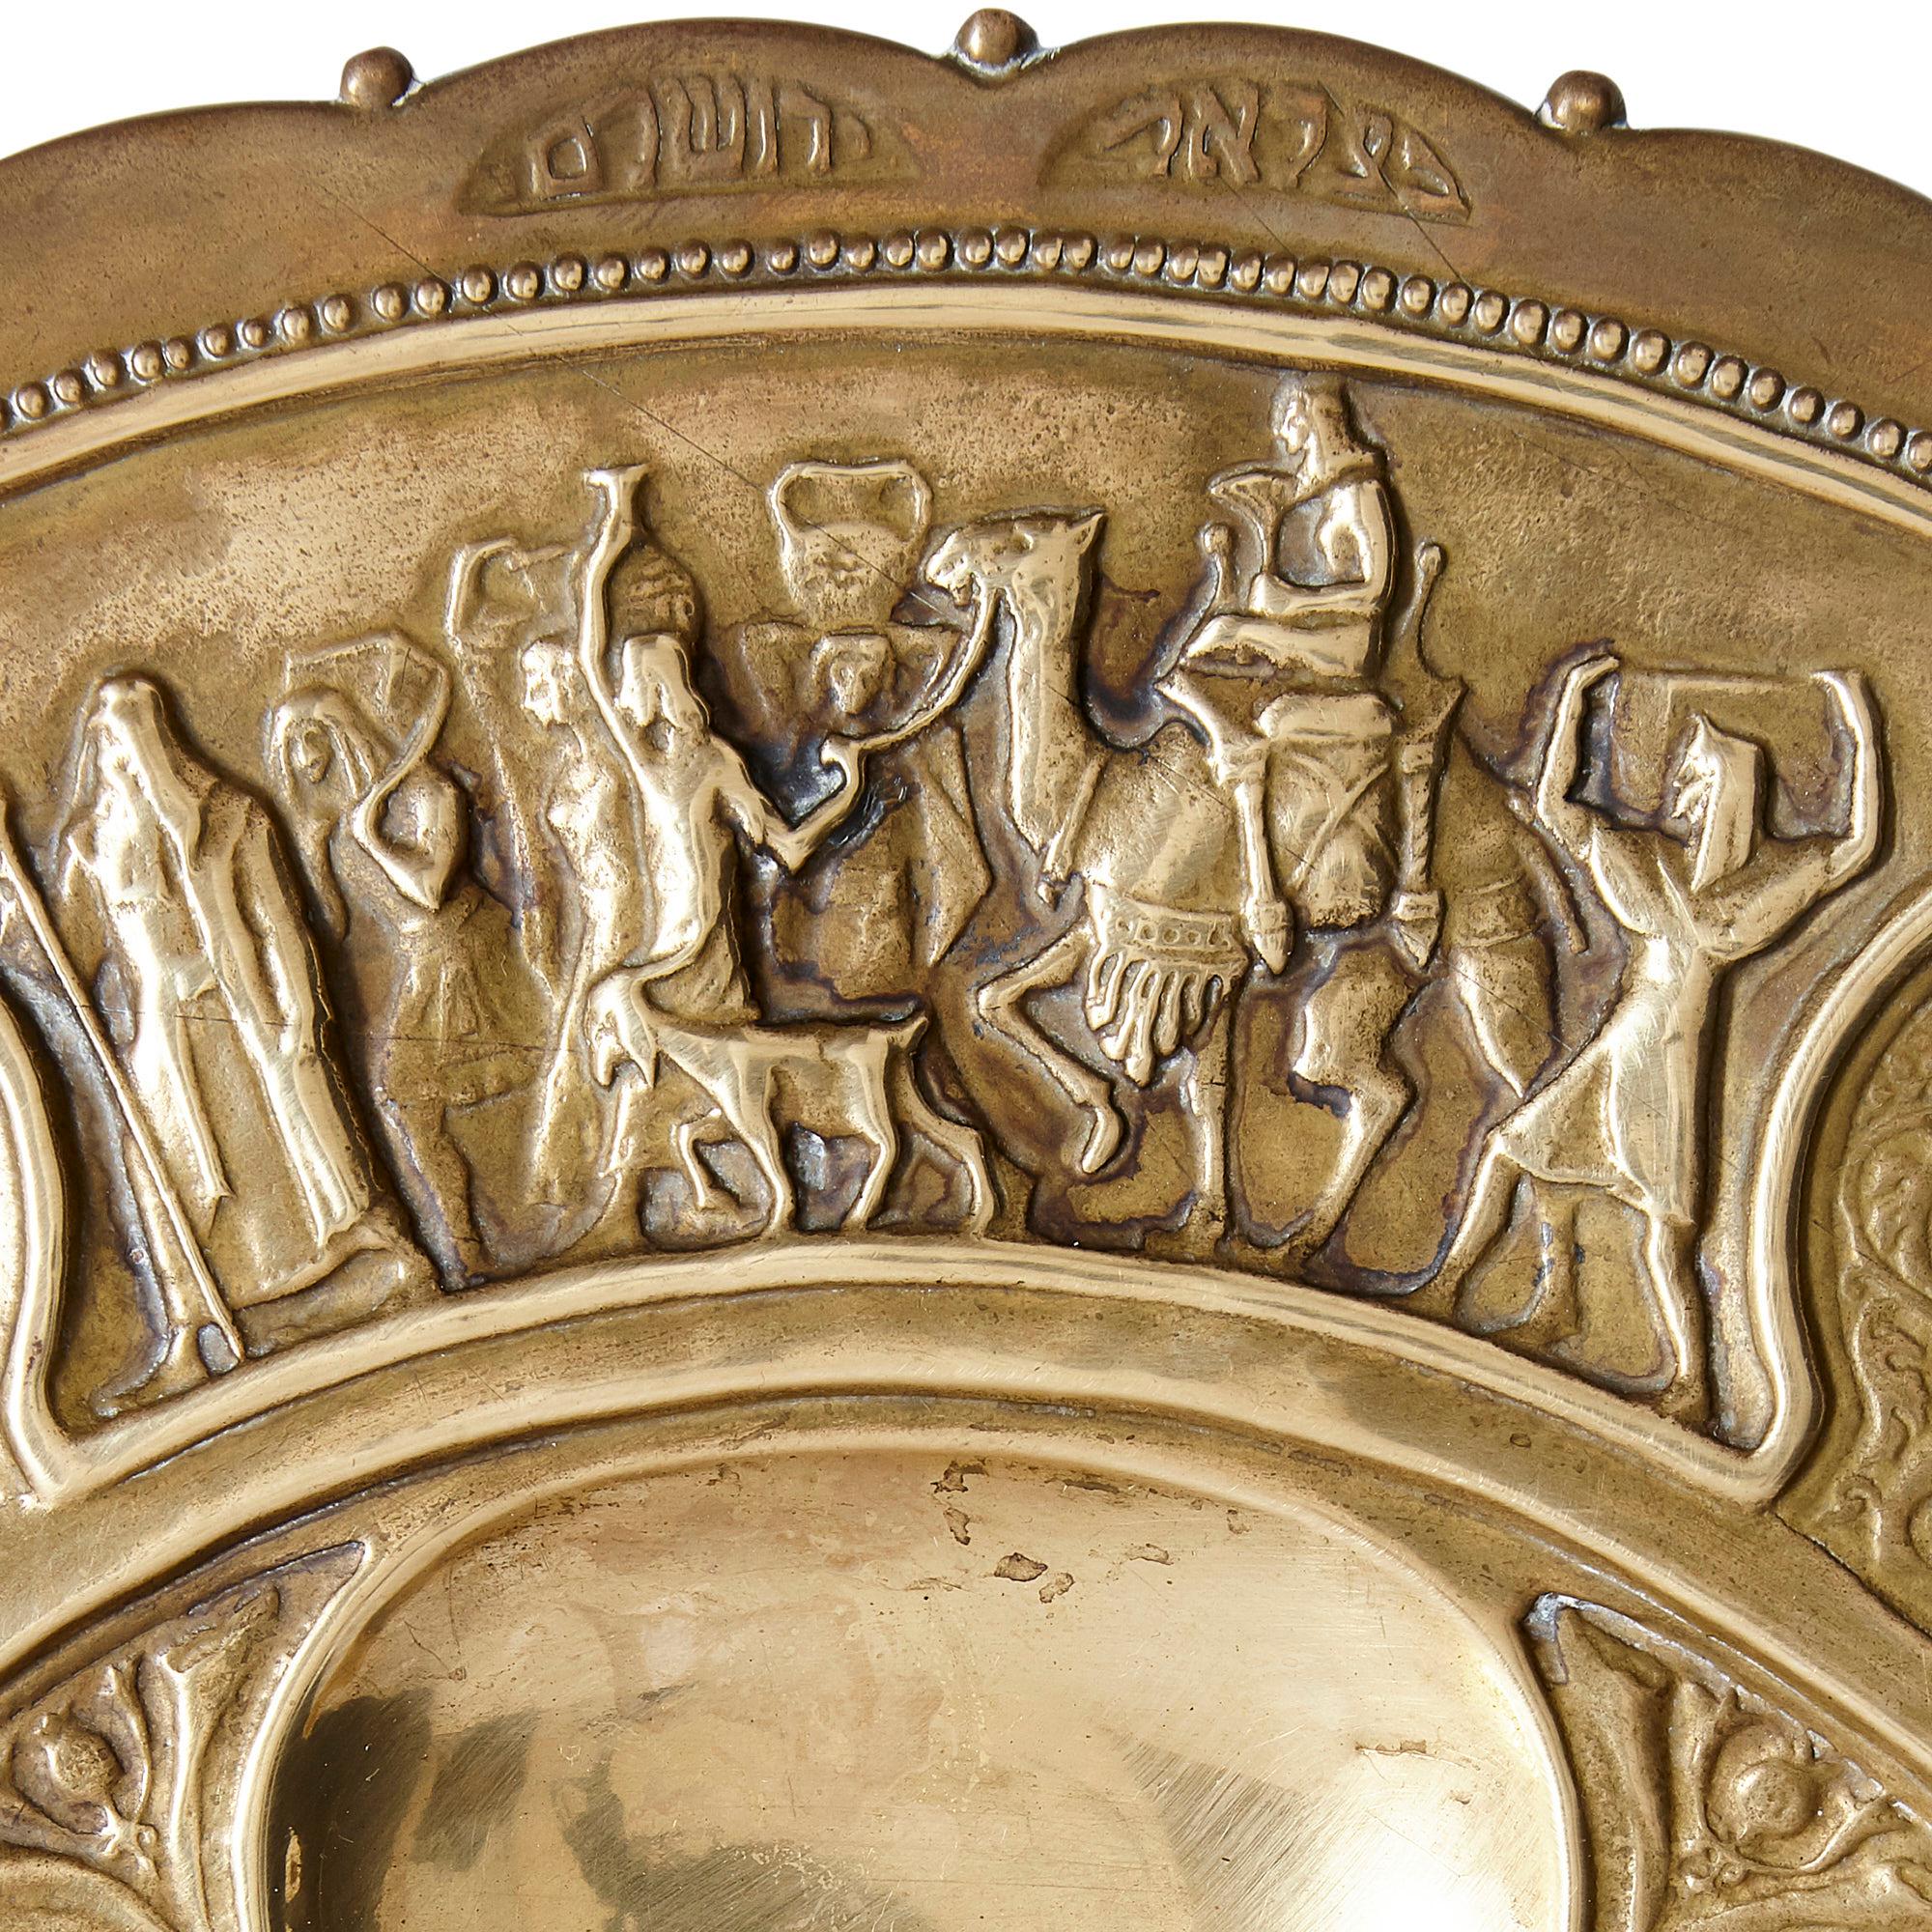 Antique Jewish Brass Seder Plate by Bezalel Academy of Arts and Design In Good Condition For Sale In London, GB